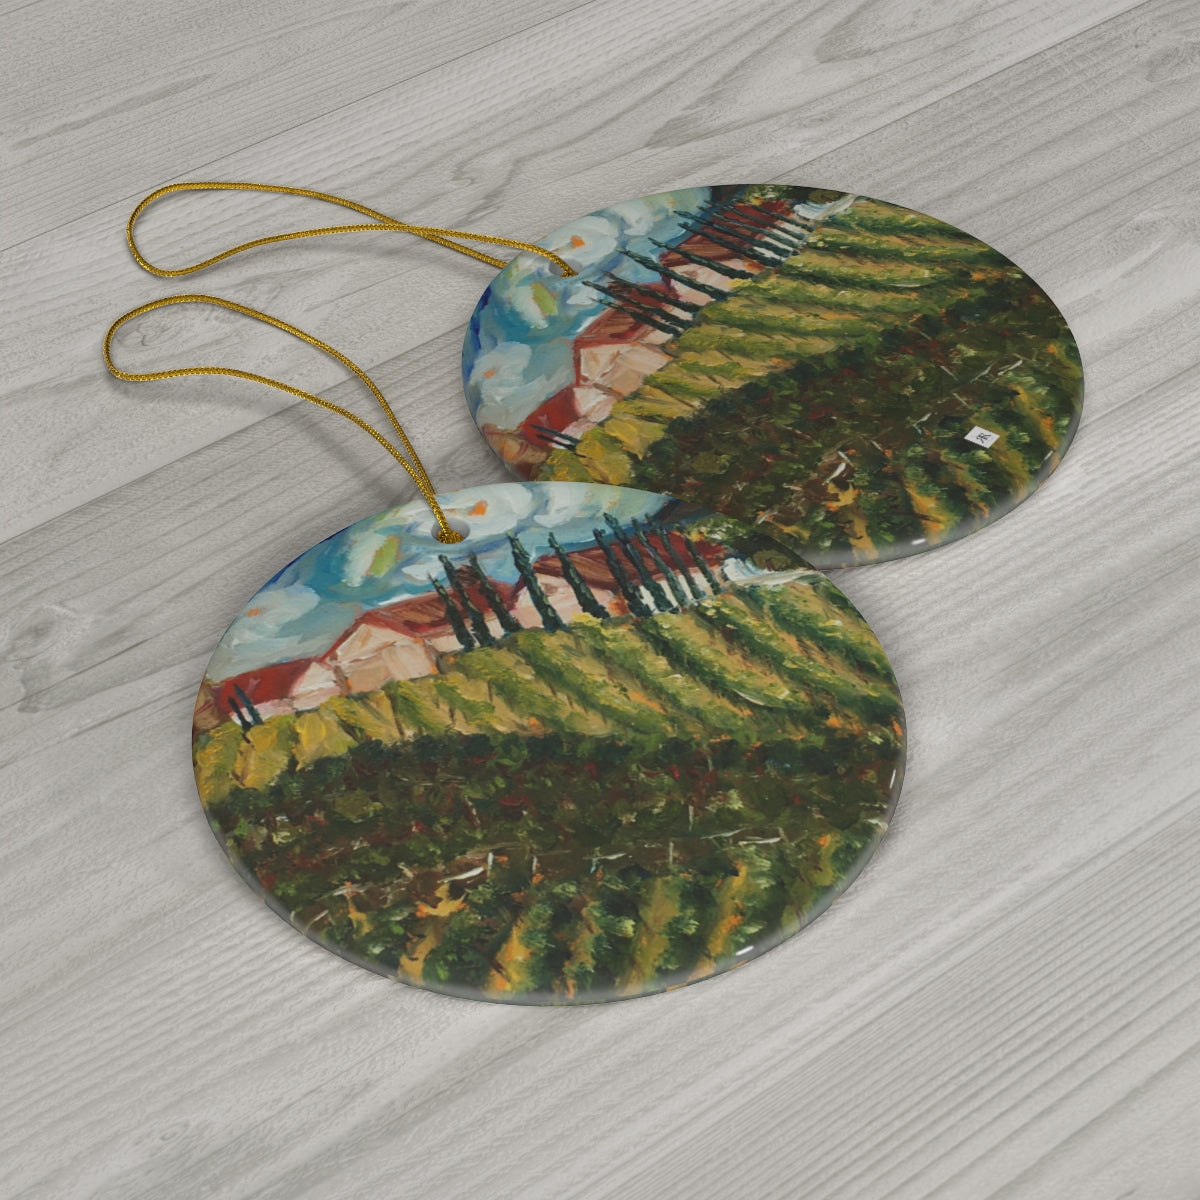 Avensole Vineyard and Winery Ceramic Ornament